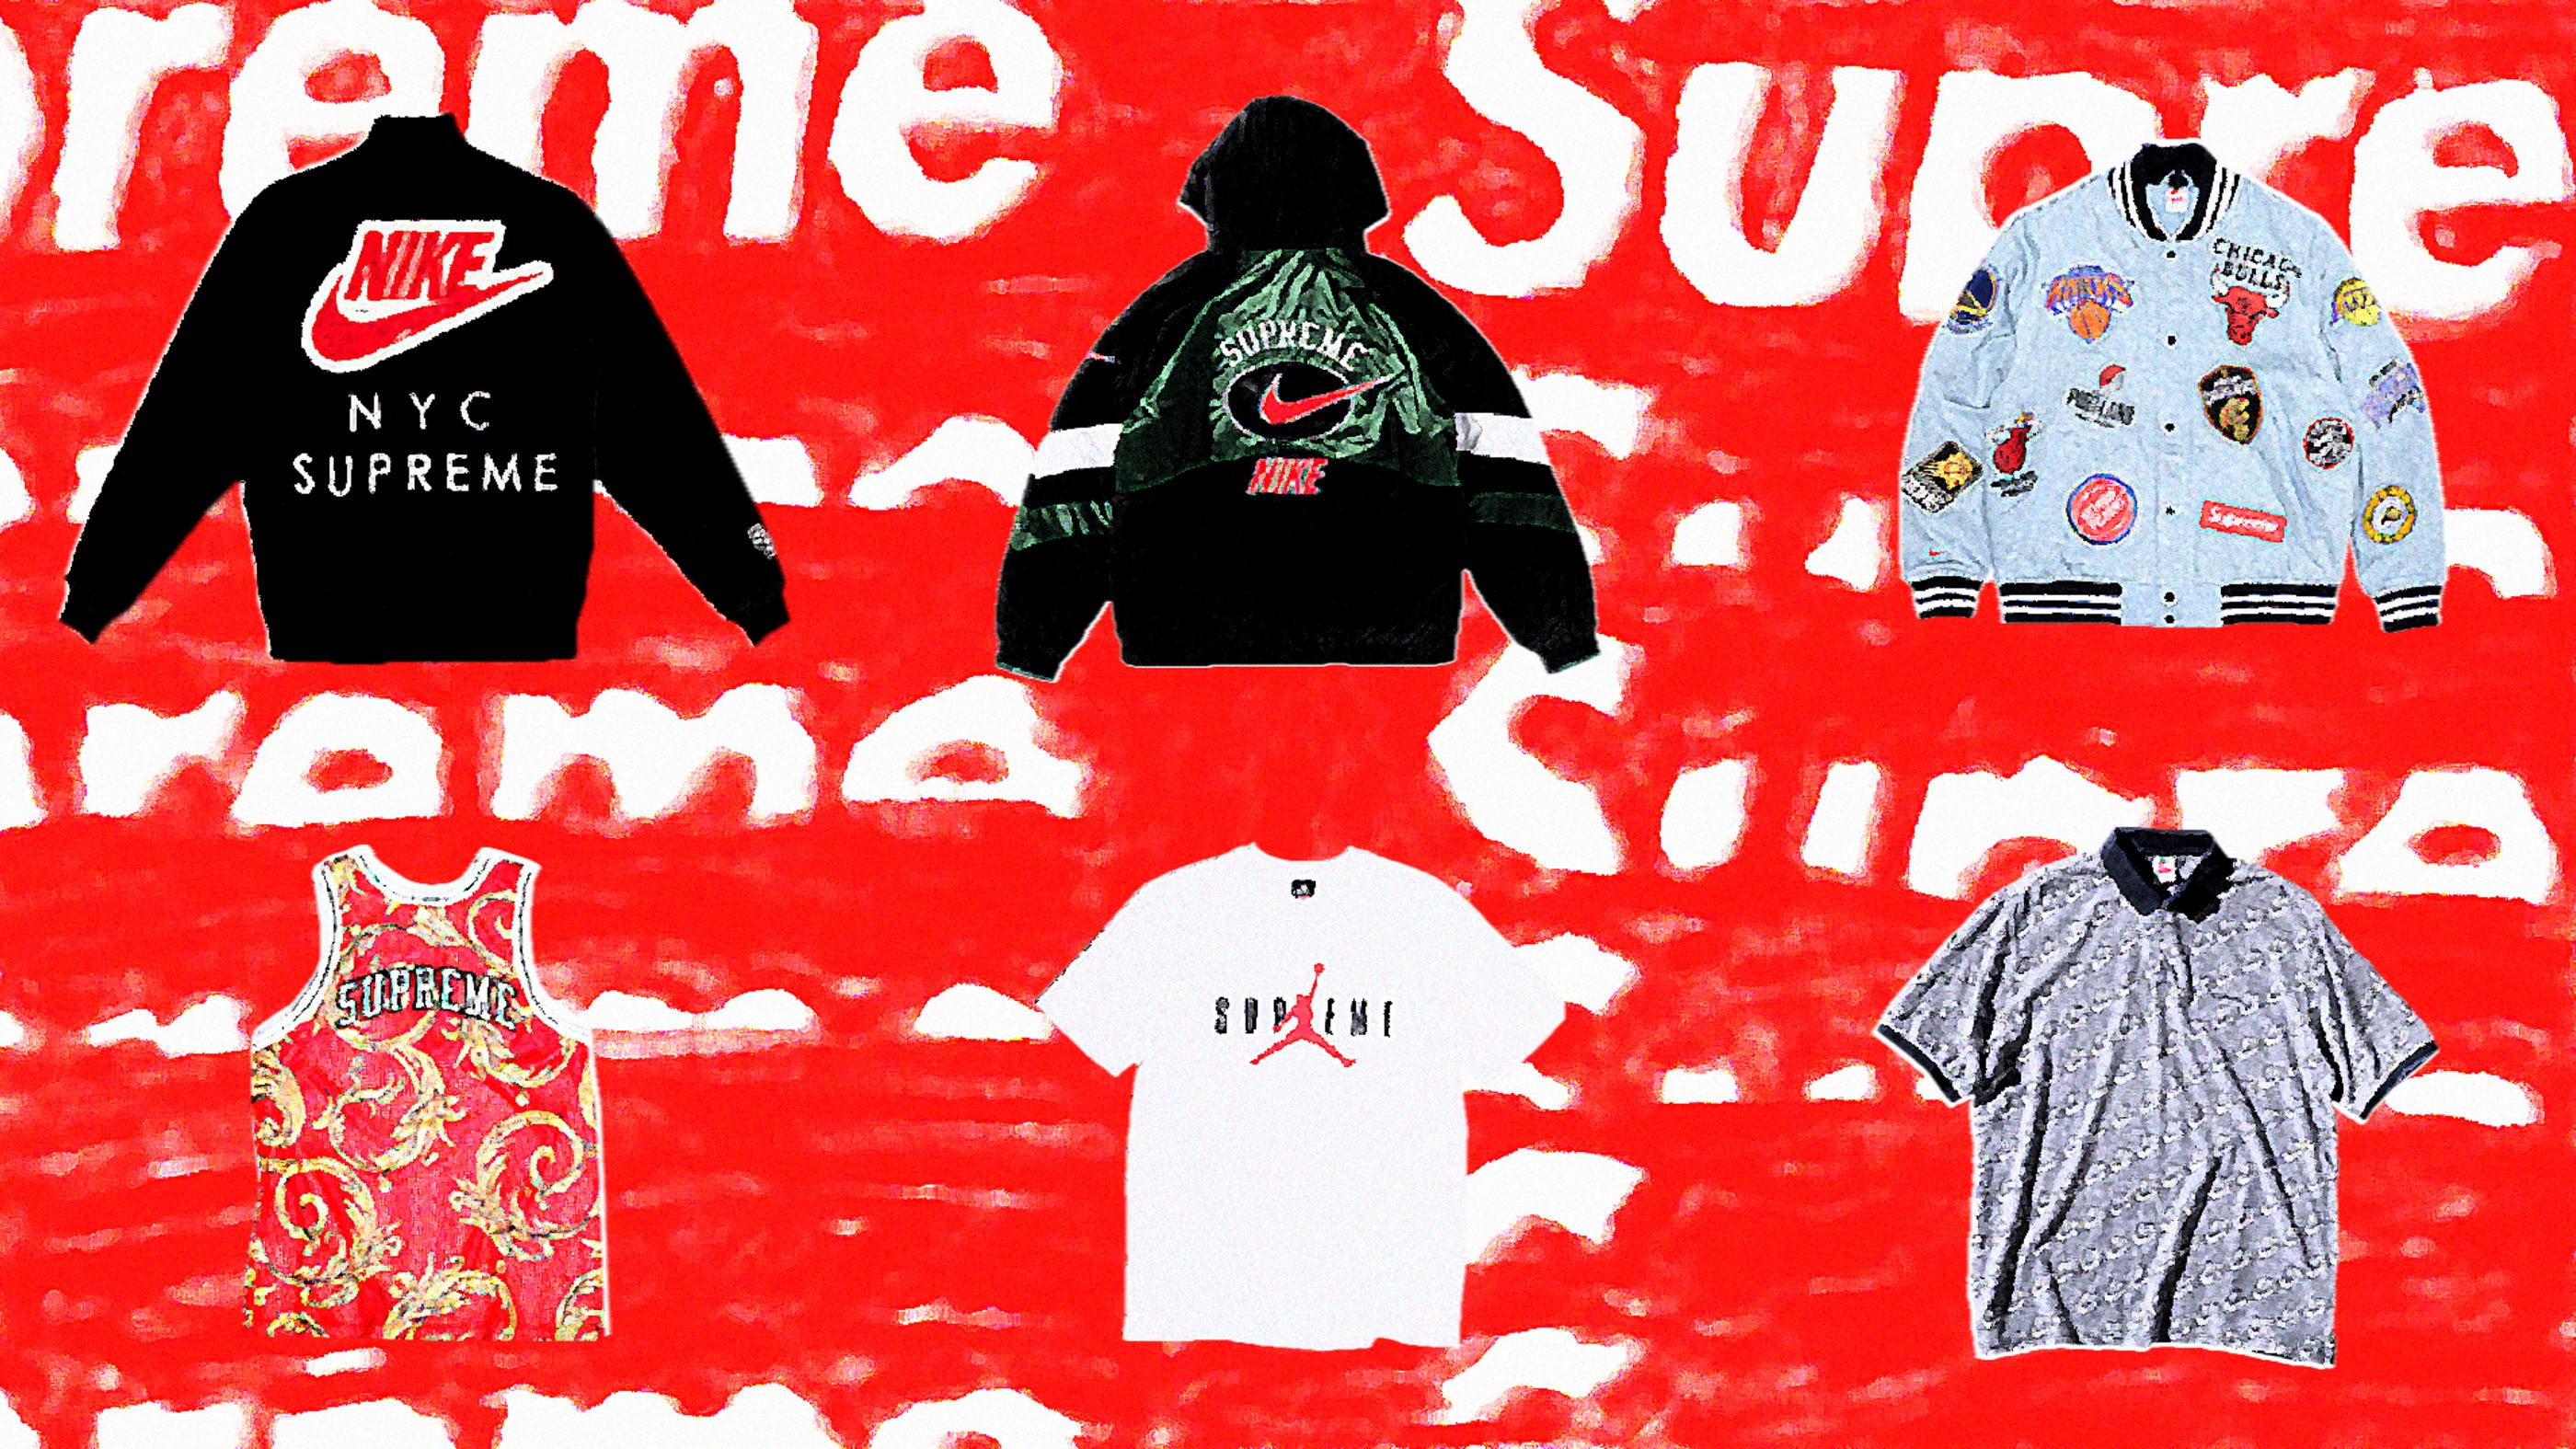 A Complete Timeline of Supreme x Nike Apparel Collaborations